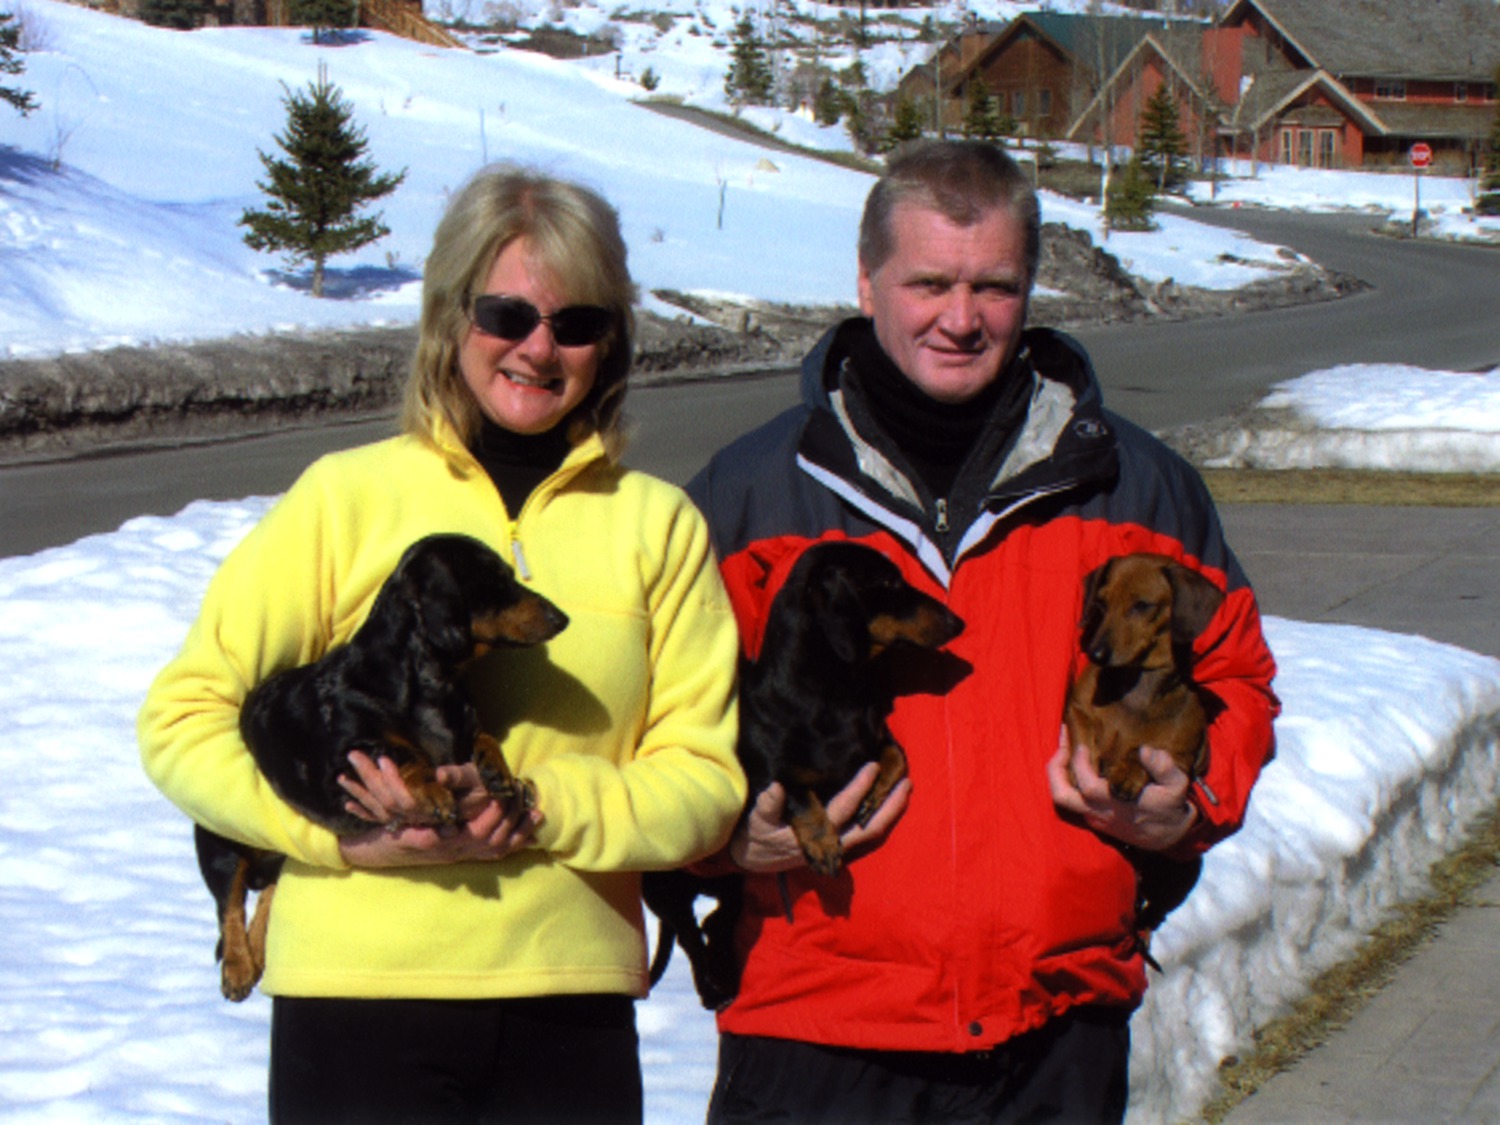 Ann and David Apple with their dachshund dogs